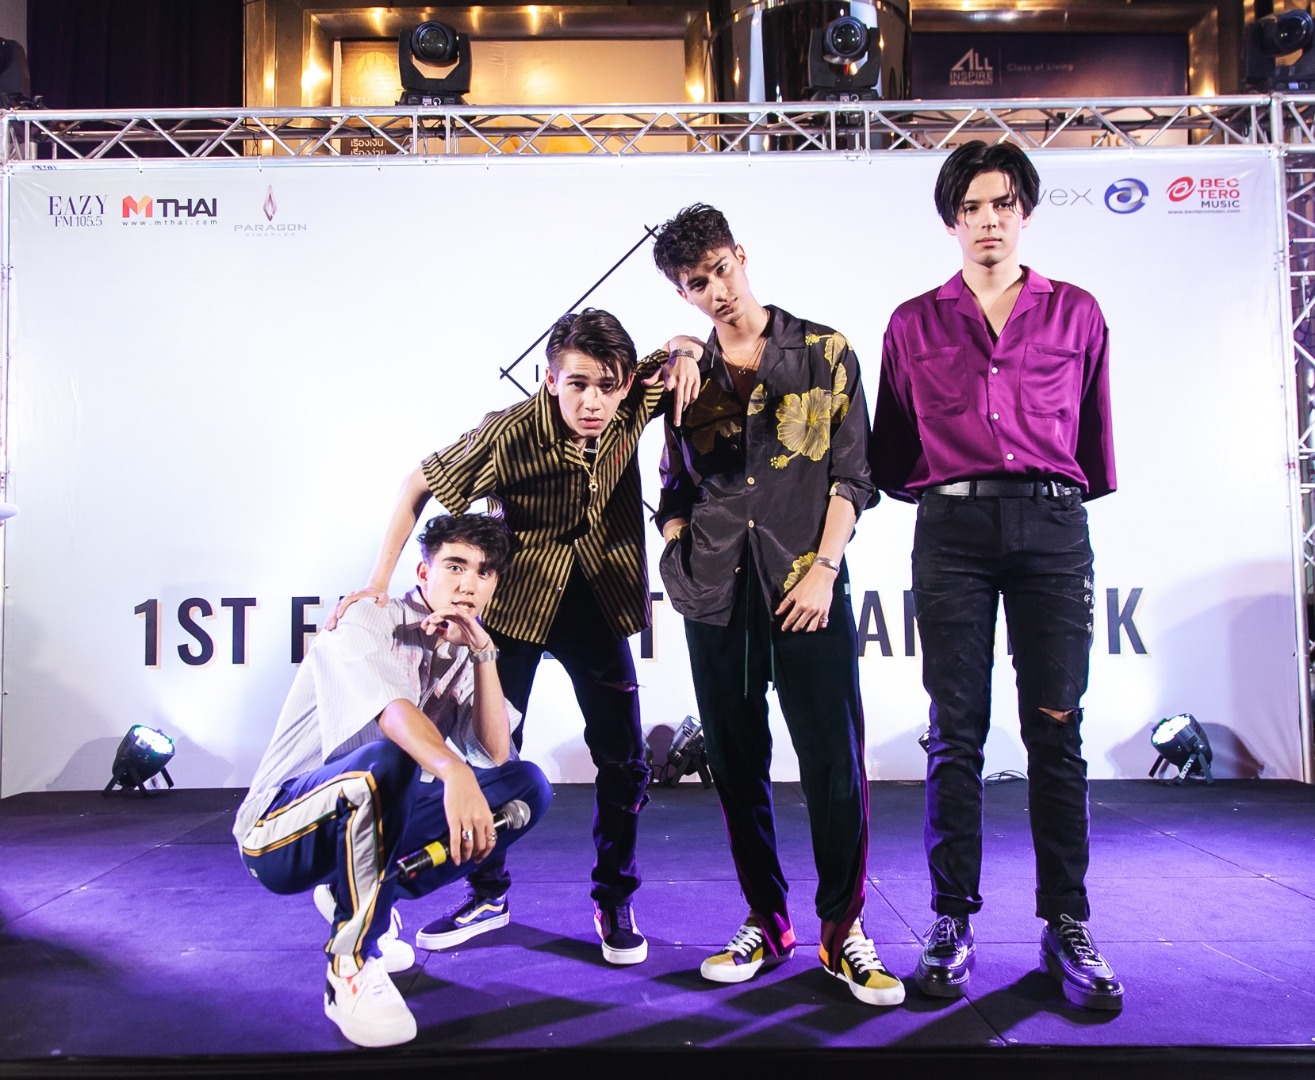 INTERSECTION 1ST FAN EVENT IN BANGKOK